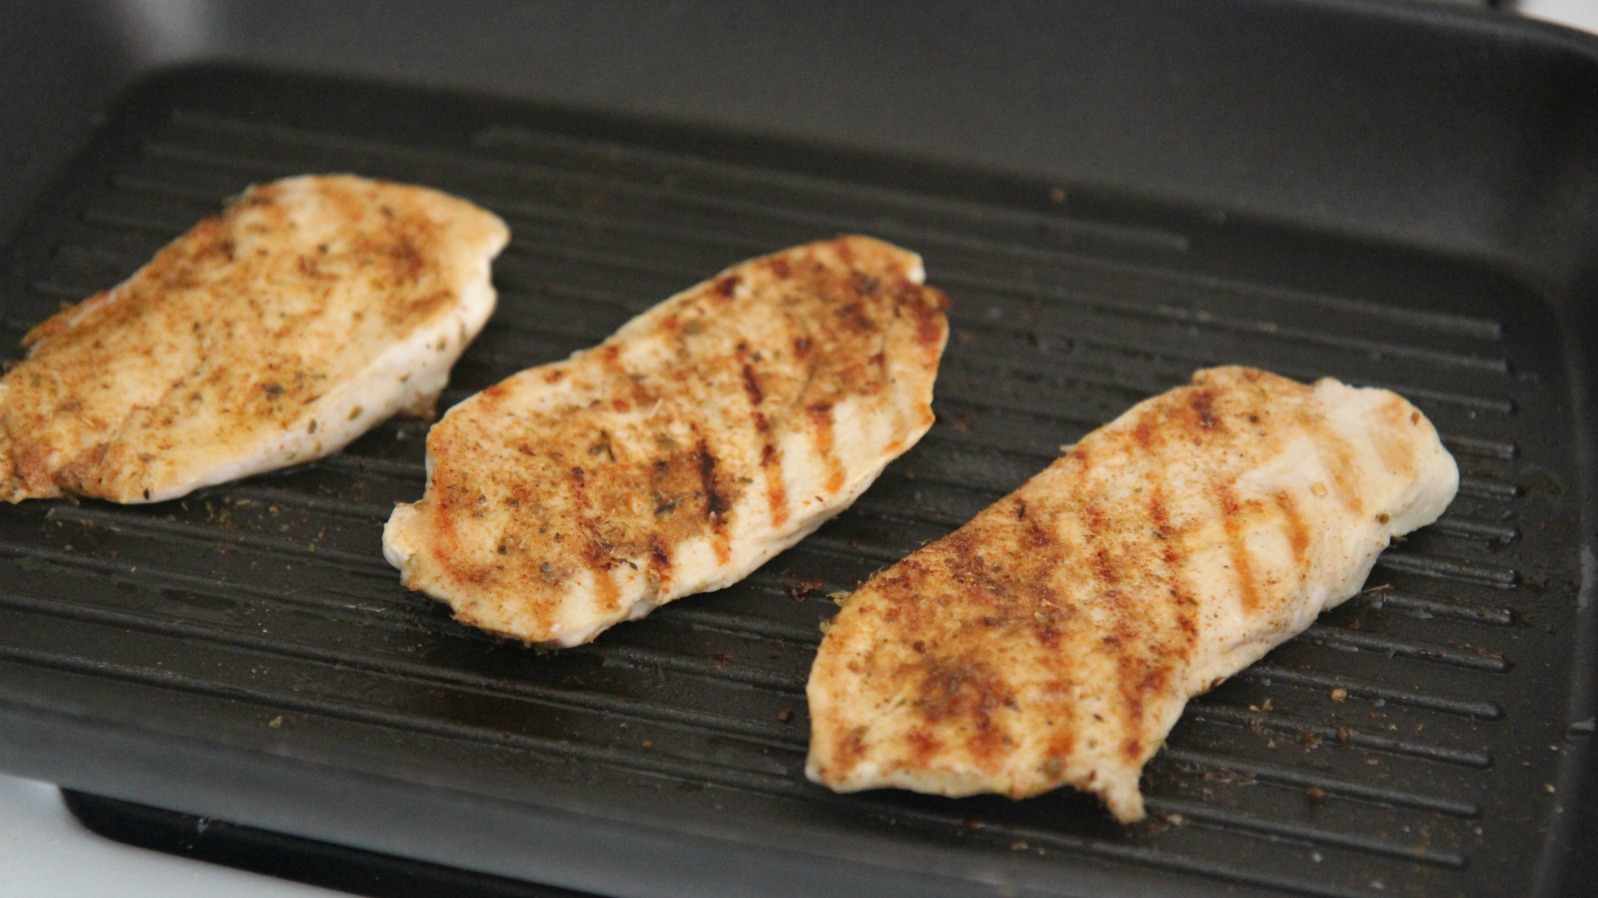 Grill or pan-fry the chicken breasts until cooked through.